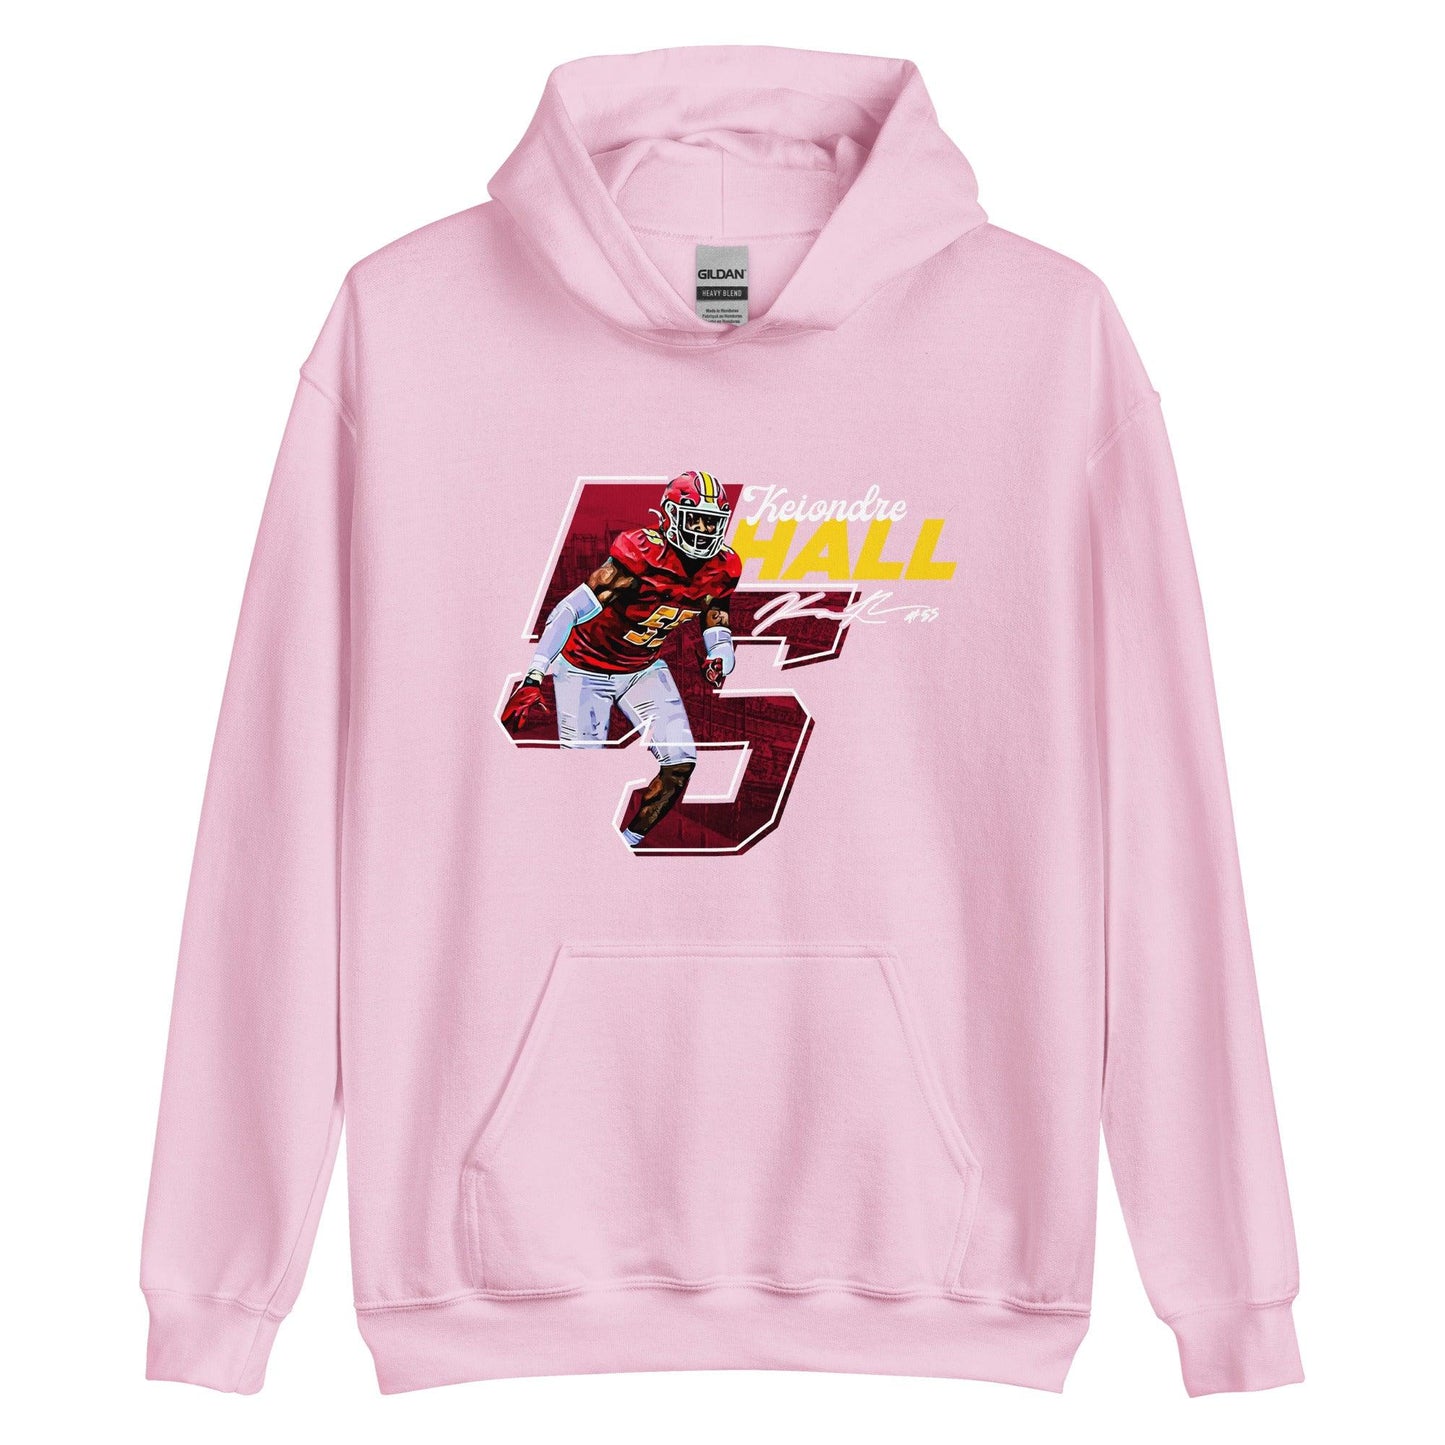 Keiondre Hall "Signature" Hoodie - Fan Arch